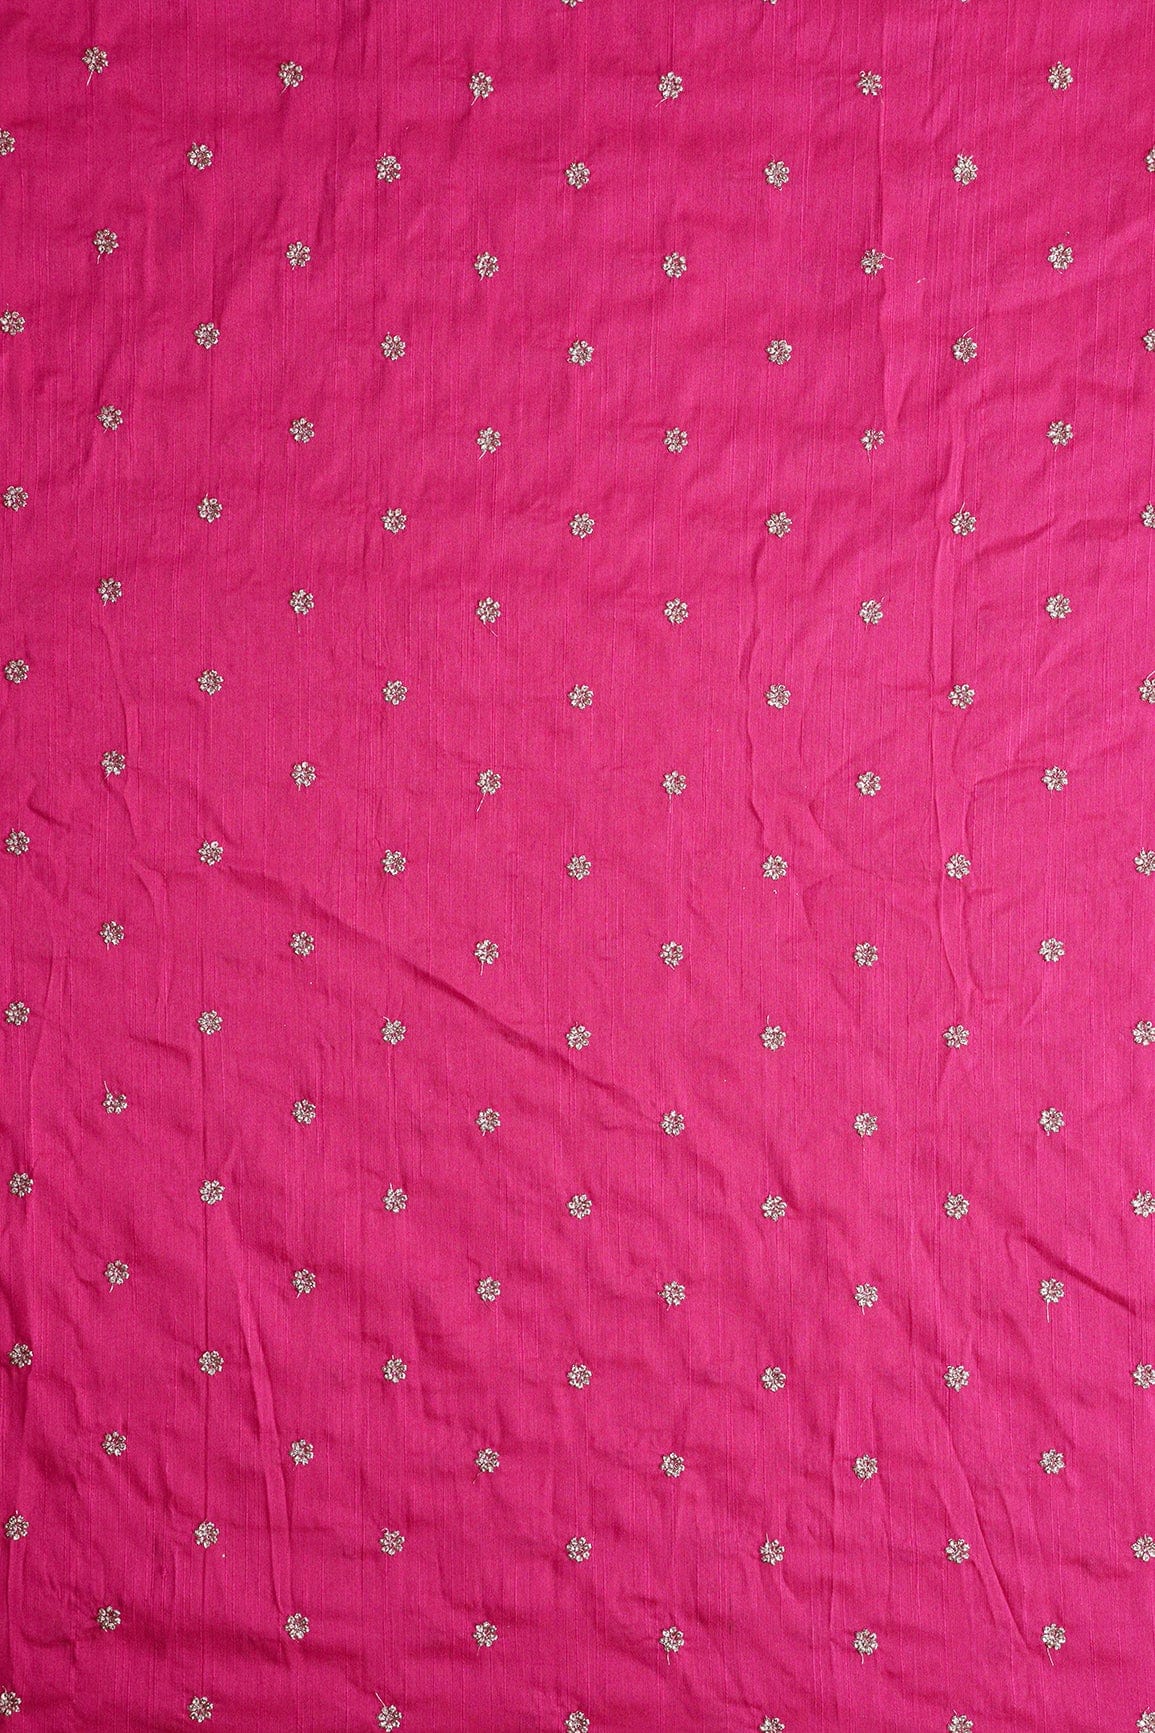 doeraa Embroidery Fabrics Gold Sequins With Gold Zari Small Motif Embroidery Work On Fuchsia Raw Silk Fabric